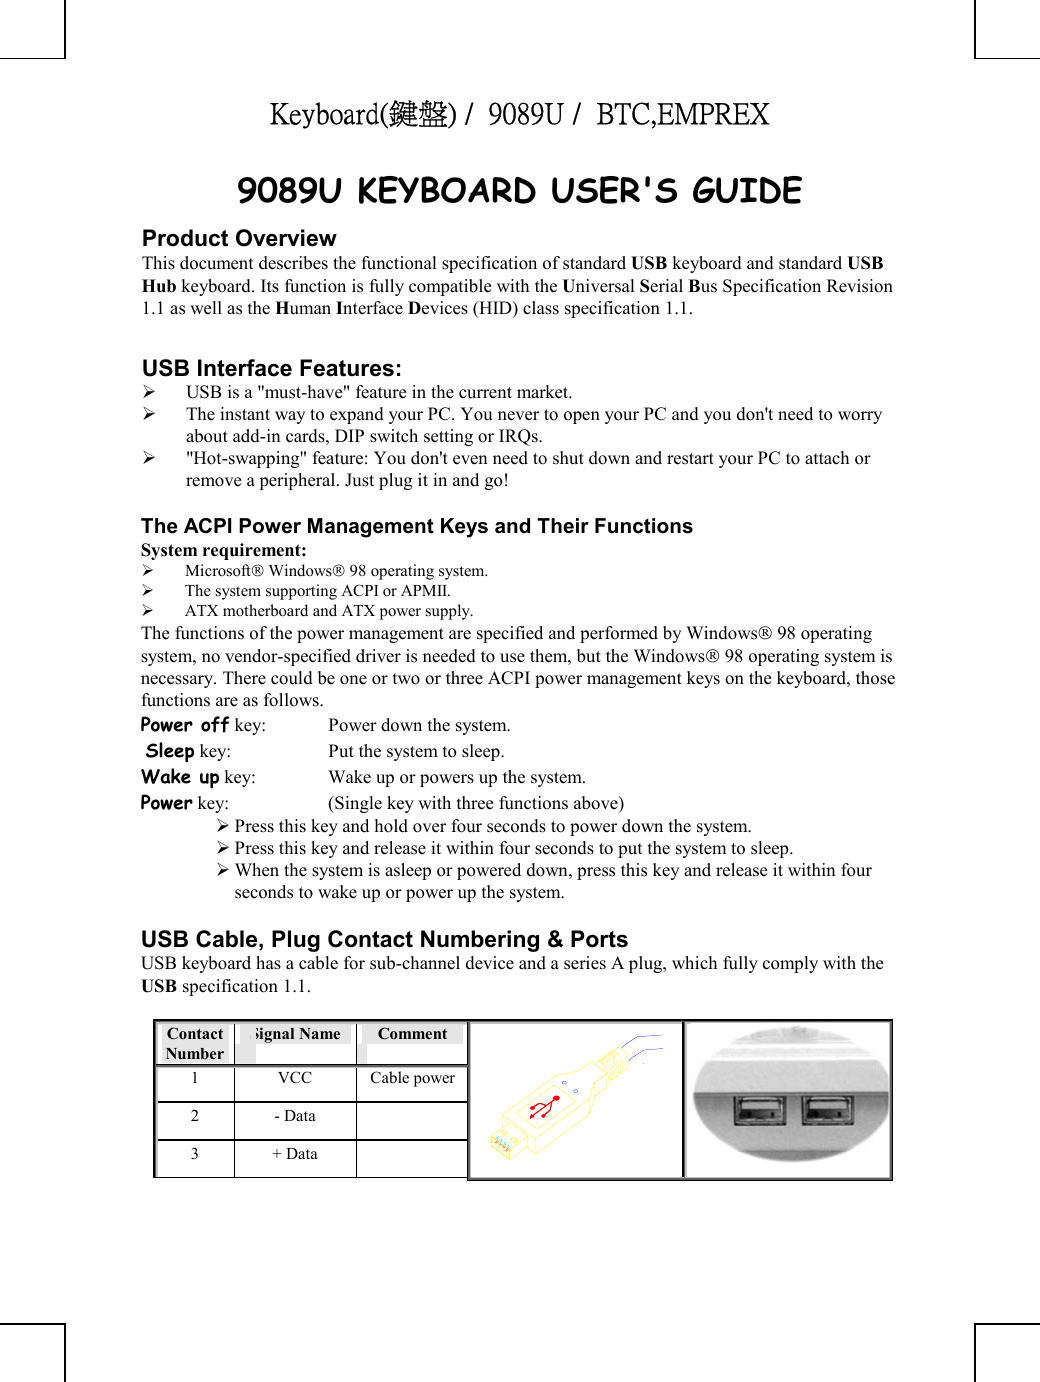 Keyboard(鍵盤) /  9089U /  BTC,EMPREX      9089U KEYBOARD USER&apos;S GUIDE Product Overview This document describes the functional specification of standard USB keyboard and standard USB Hub keyboard. Its function is fully compatible with the Universal Serial Bus Specification Revision 1.1 as well as the Human Interface Devices (HID) class specification 1.1.  USB Interface Features:   USB is a &quot;must-have&quot; feature in the current market.   The instant way to expand your PC. You never to open your PC and you don&apos;t need to worry about add-in cards, DIP switch setting or IRQs.   &quot;Hot-swapping&quot; feature: You don&apos;t even need to shut down and restart your PC to attach or remove a peripheral. Just plug it in and go!  The ACPI Power Management Keys and Their Functions System requirement:    Microsoft Windows 98 operating system.   The system supporting ACPI or APMII.   ATX motherboard and ATX power supply. The functions of the power management are specified and performed by Windows 98 operating system, no vendor-specified driver is needed to use them, but the Windows 98 operating system is necessary. There could be one or two or three ACPI power management keys on the keyboard, those functions are as follows. Power off key:  Power down the system.  Sleep key:  Put the system to sleep.  Wake up key:  Wake up or powers up the system.  Power key:  (Single key with three functions above)       Press this key and hold over four seconds to power down the system.  Press this key and release it within four seconds to put the system to sleep.  When the system is asleep or powered down, press this key and release it within four seconds to wake up or power up the system.  USB Cable, Plug Contact Numbering &amp; Ports USB keyboard has a cable for sub-channel device and a series A plug, which fully comply with the USB specification 1.1.  Contact Number Signal Name   Comment 1 VCC Cable power2 - Data   3 + Data    